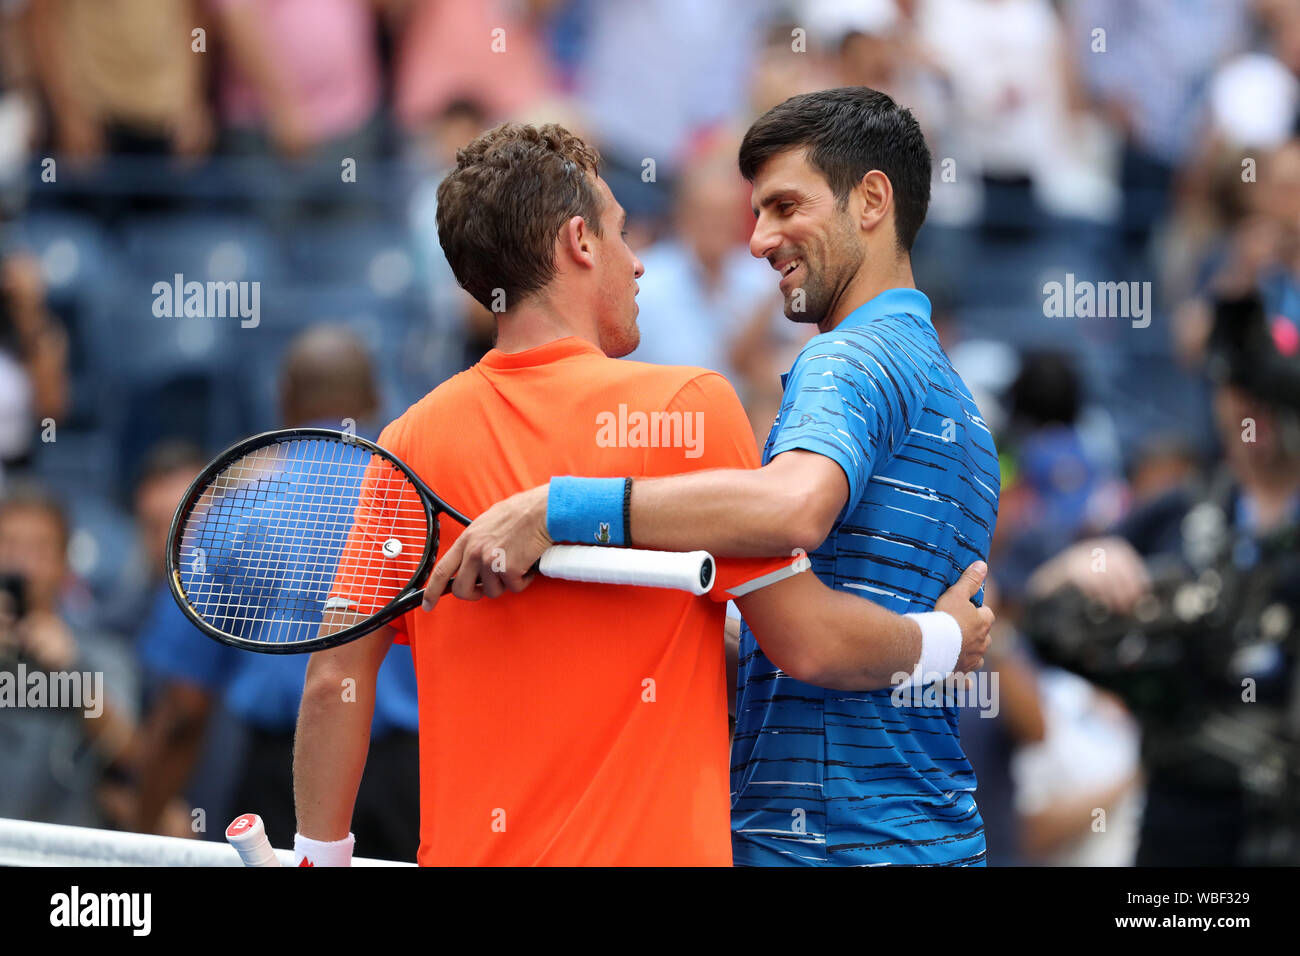 New York, USA. 26th Aug, 2019. Novak Djokovic (R) of Serbia talks to  Roberto Carballes Baena of Spain after the men's singles first round match  at the 2019 US Open in New